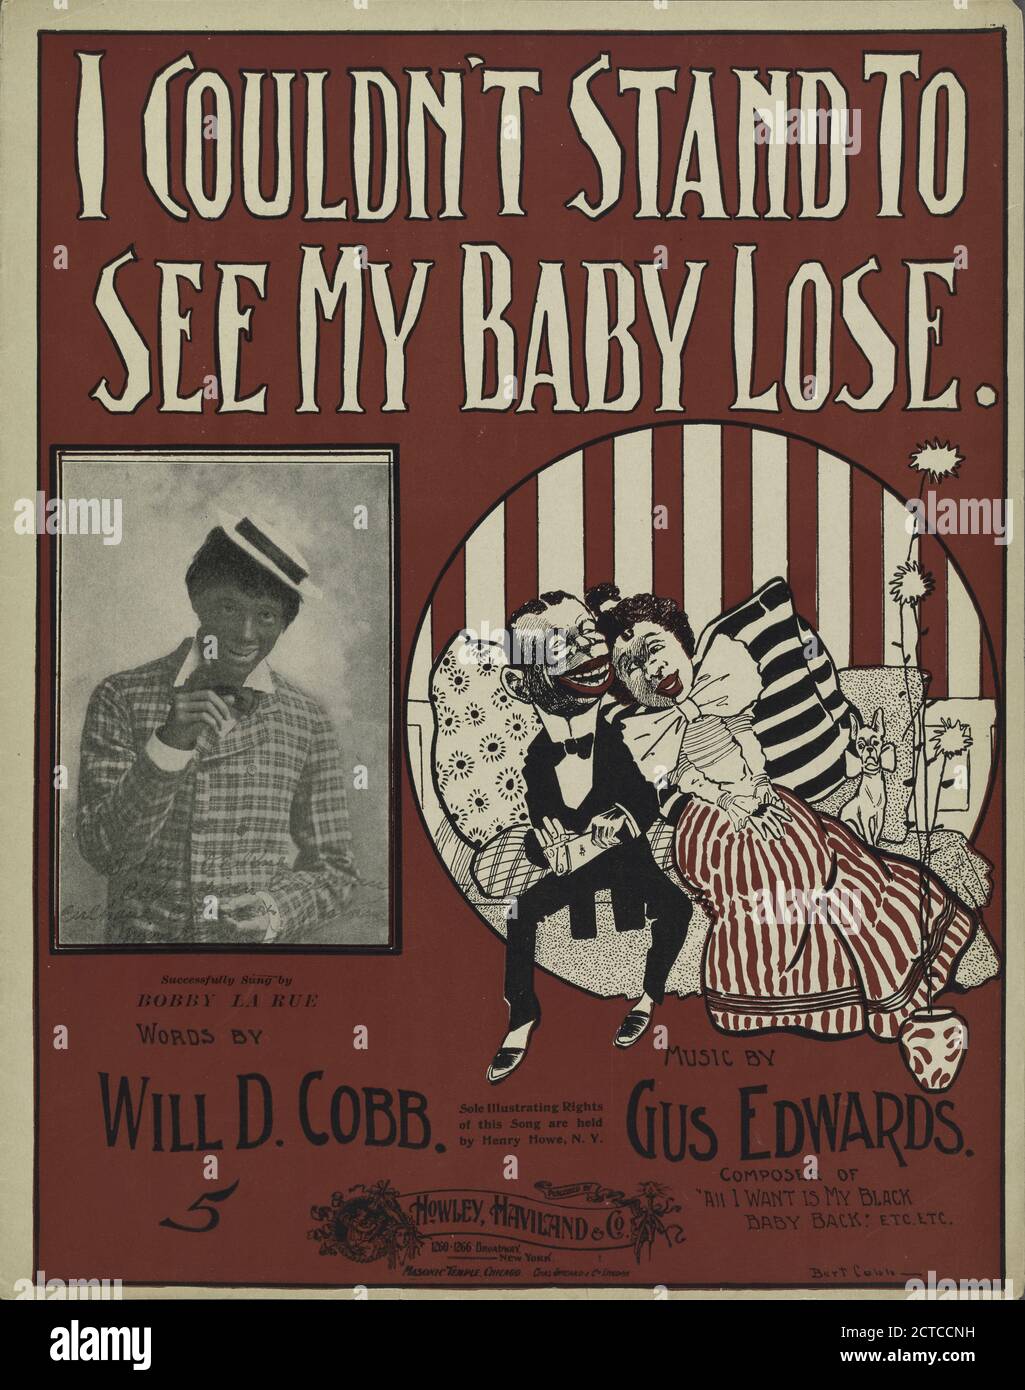 I couldn't stand to see my baby lose, notated music, Scores, 1899, Cobb, Will D. (1876-1930), Edwards, Gus (1879-1945 Stock Photo